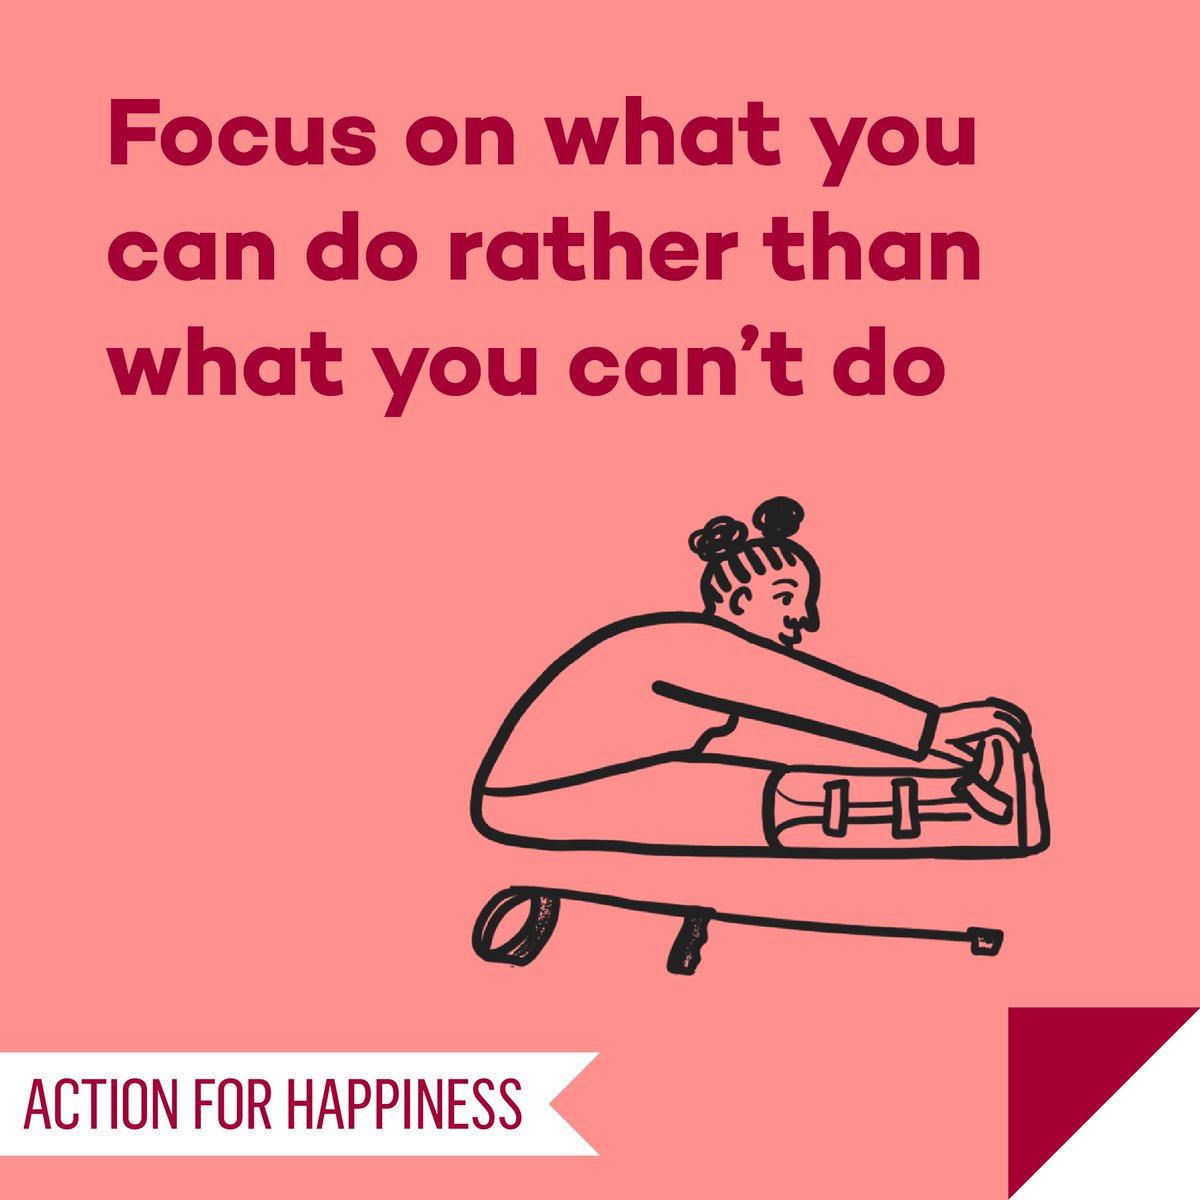 Meaningful May - Day 2: Focus on what you can do rather than what you can’t do actionforhappiness.org/meaningful-may #MeaningfulMay